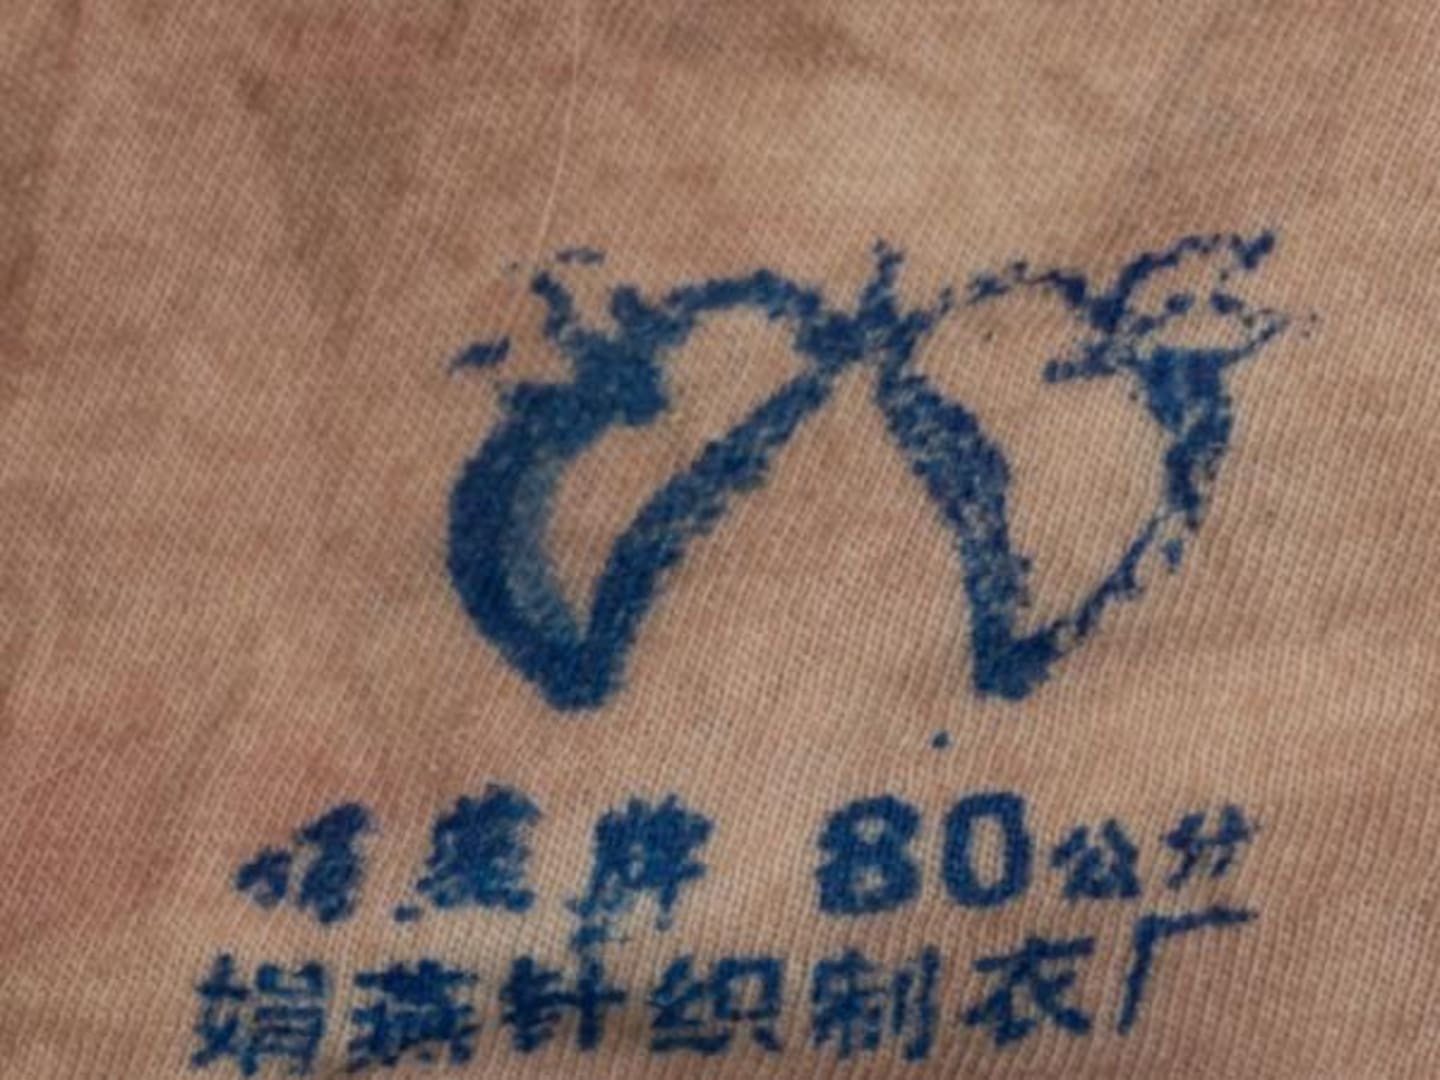 Police investigating the murder of an Asian woman whose body was found at Gulf Harbour released this photo of branding on a singlet found on the body. Photo / NZ Police